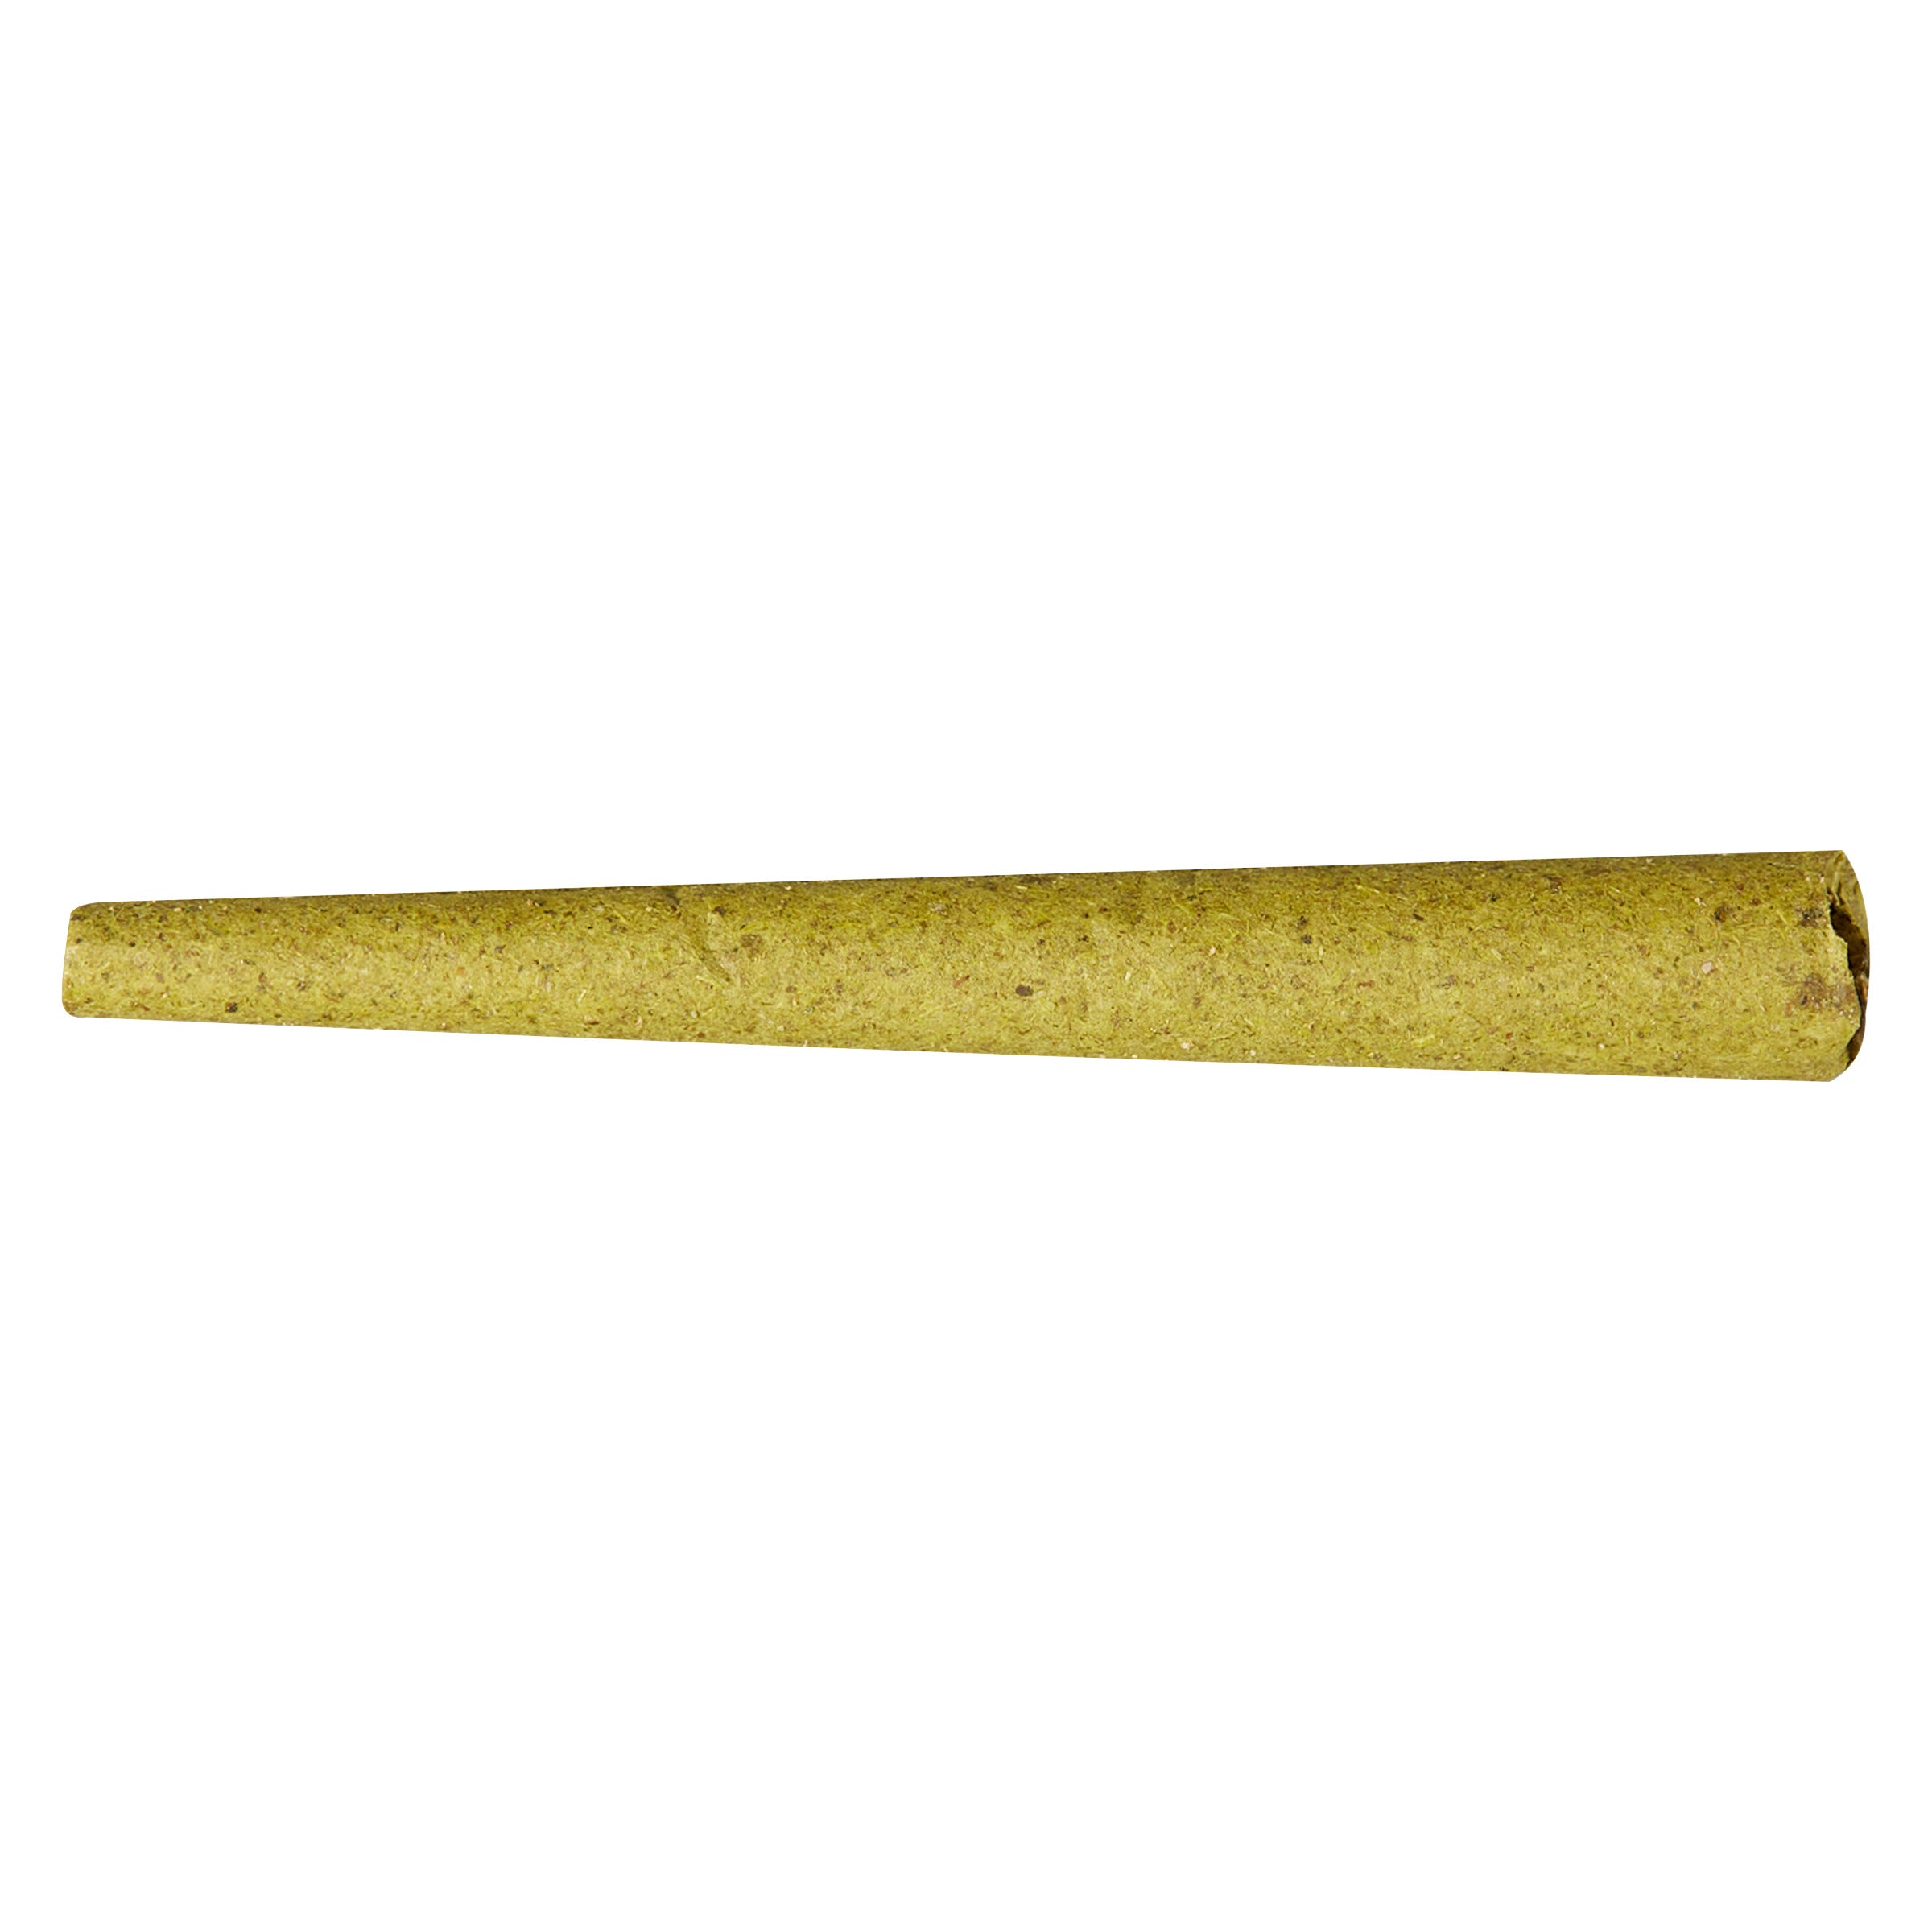 GOOD SUPPLY GROOVY GRAPE (IND) INF PRE-ROLL - 0.5G X 5